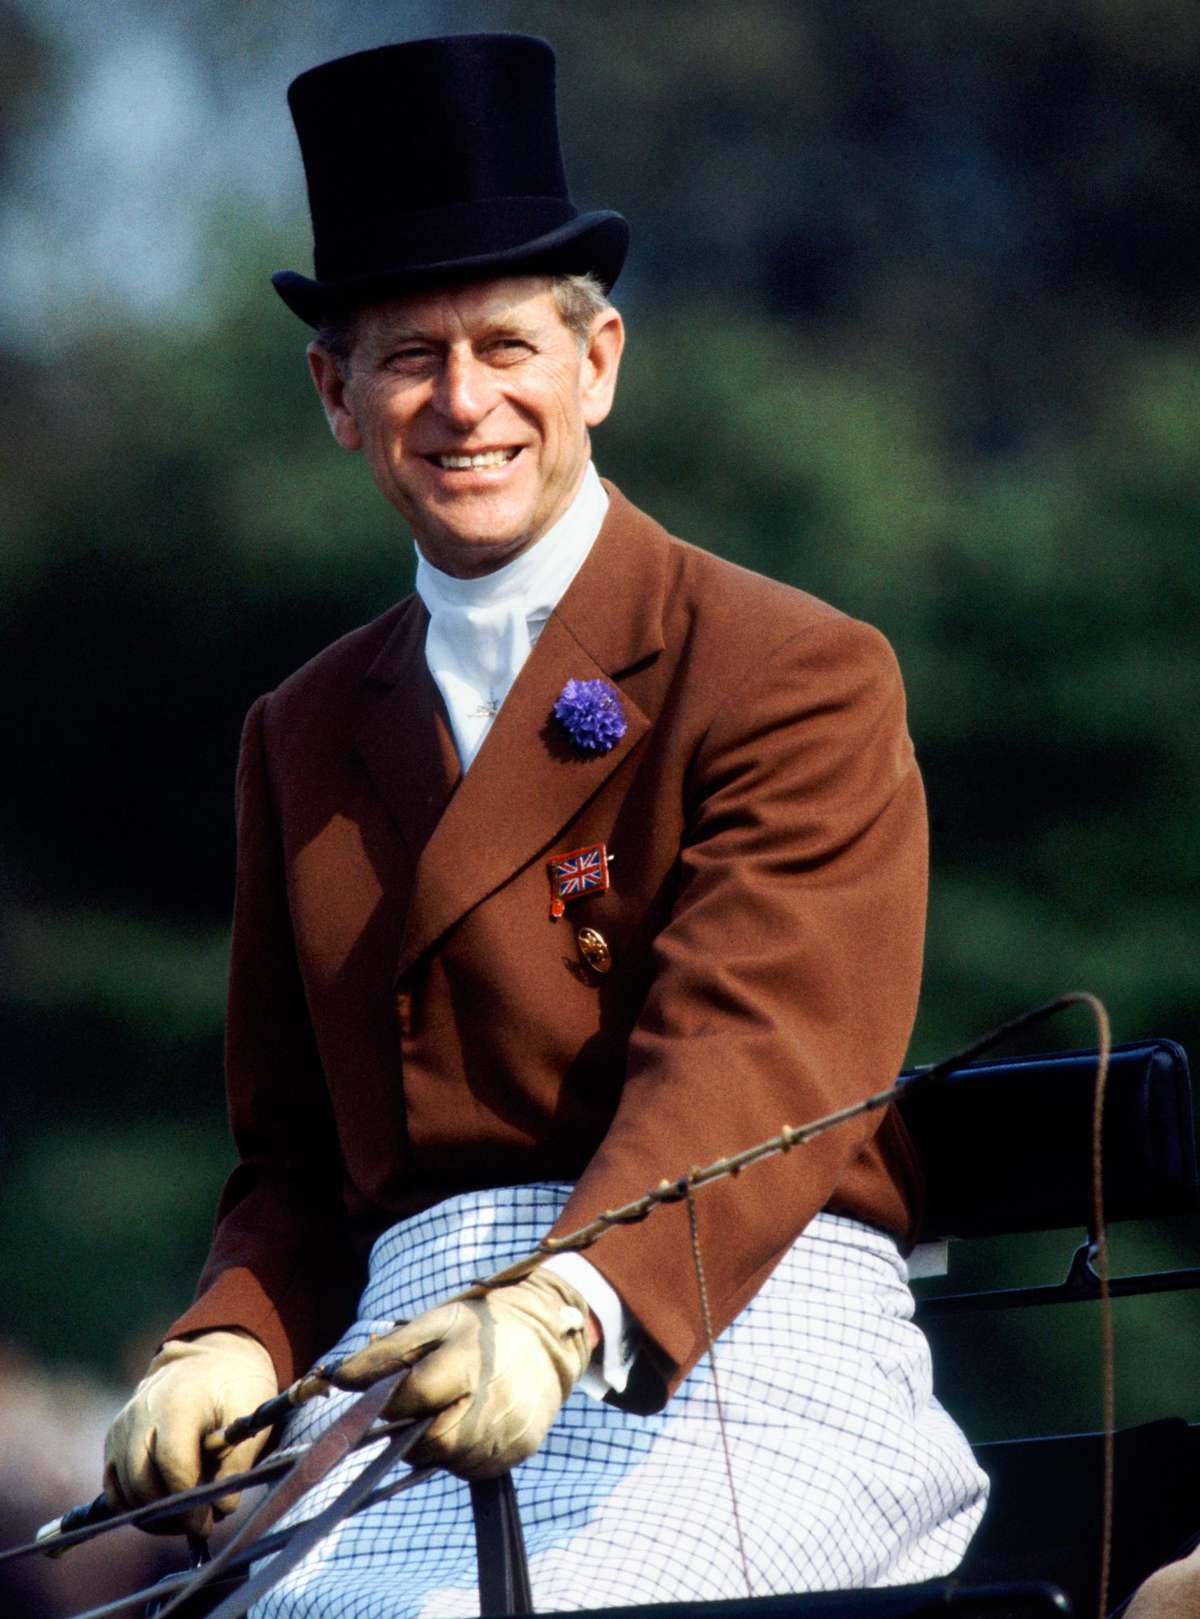 Prince Philip Drives a Horse Carriage